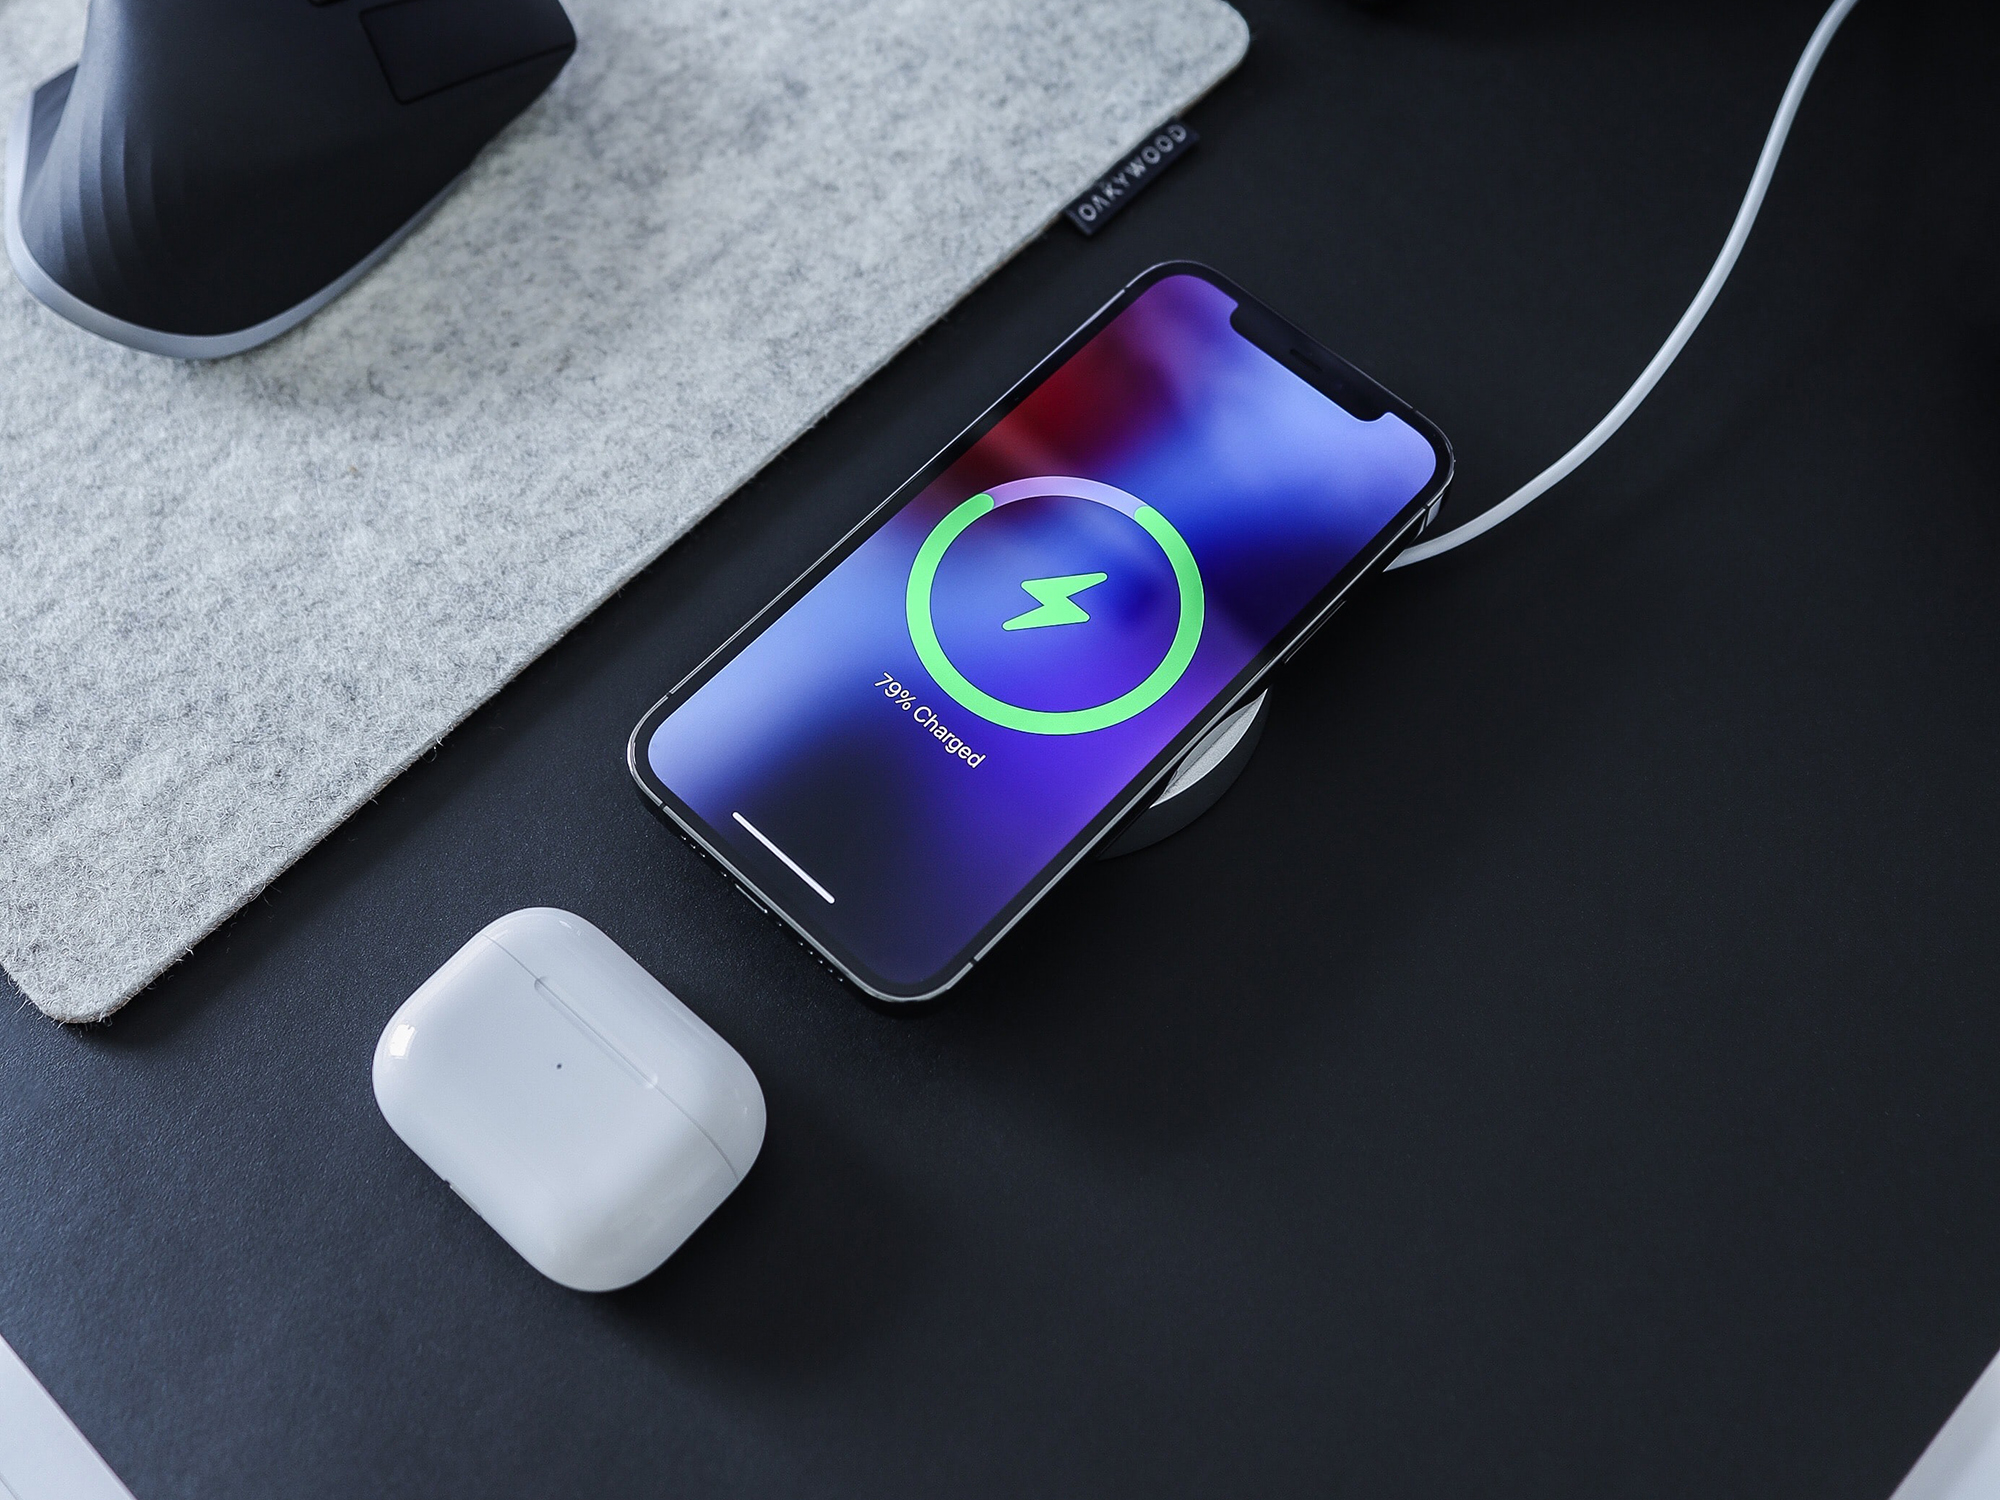 Wired vs wireless charging: Which is faster and why?